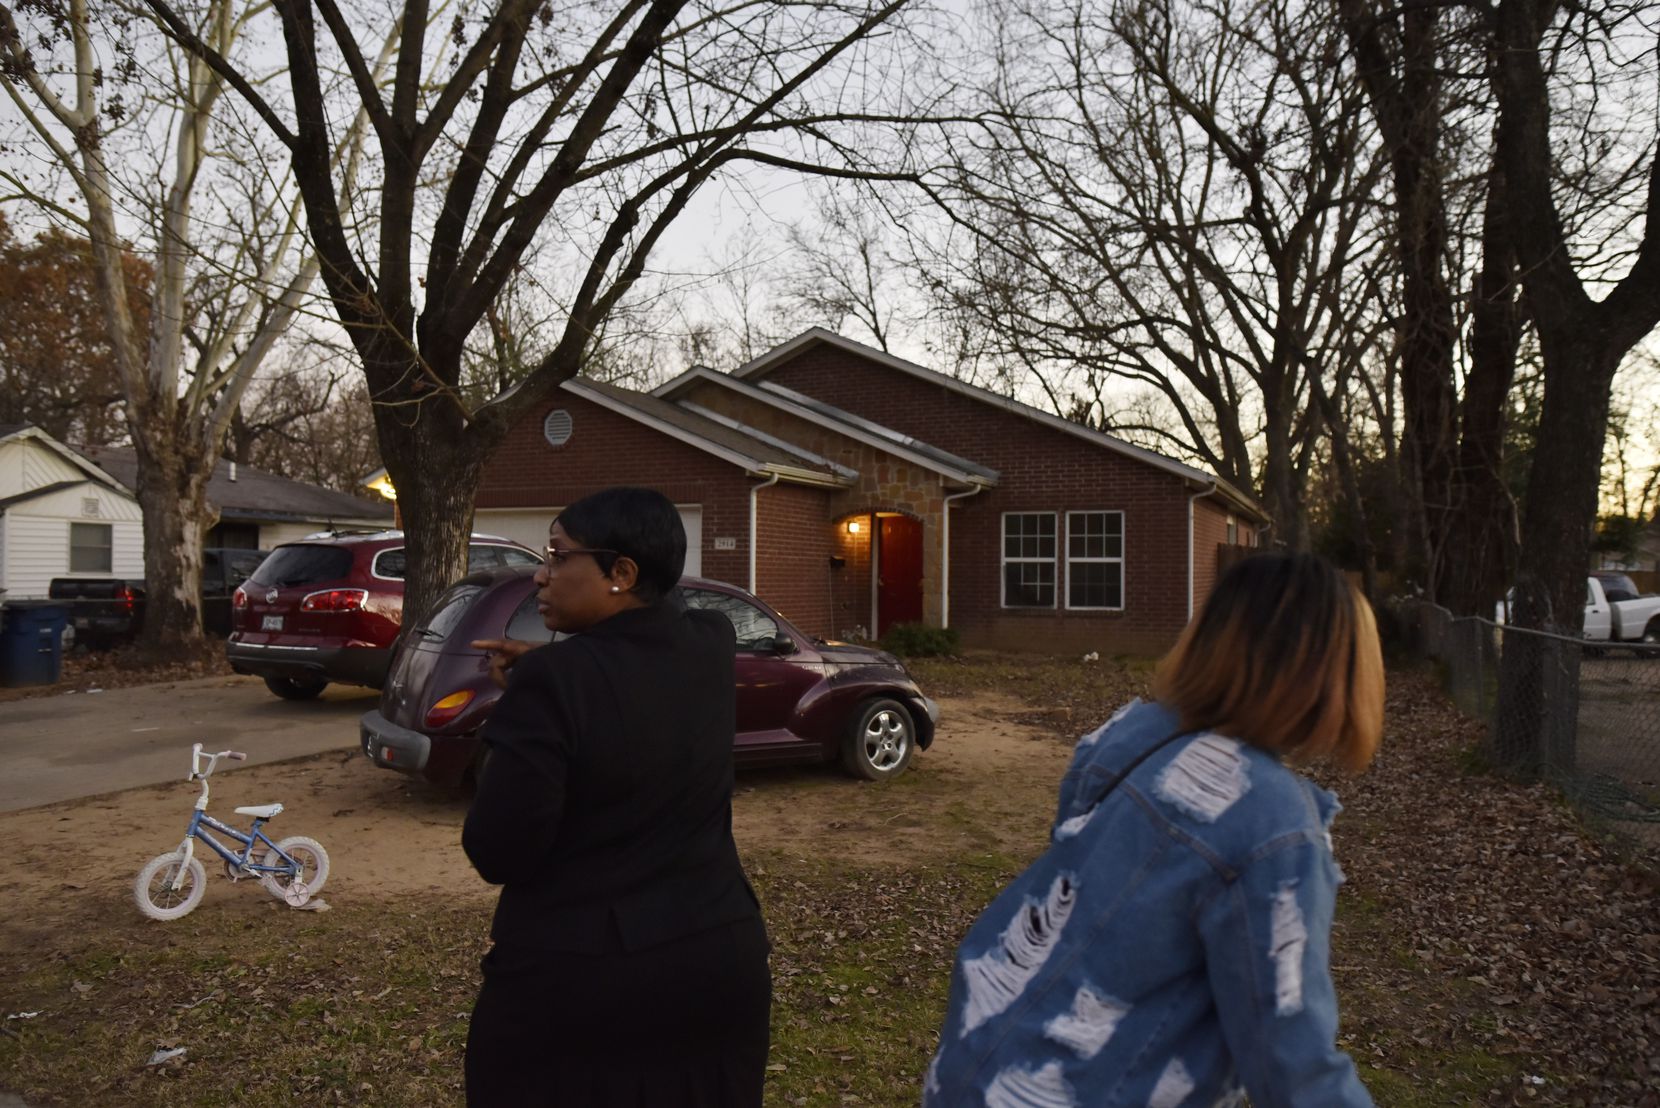 Ella Mae Beasley, 57, left, and her niece walked by the home where 1-year-old Rory Norman...